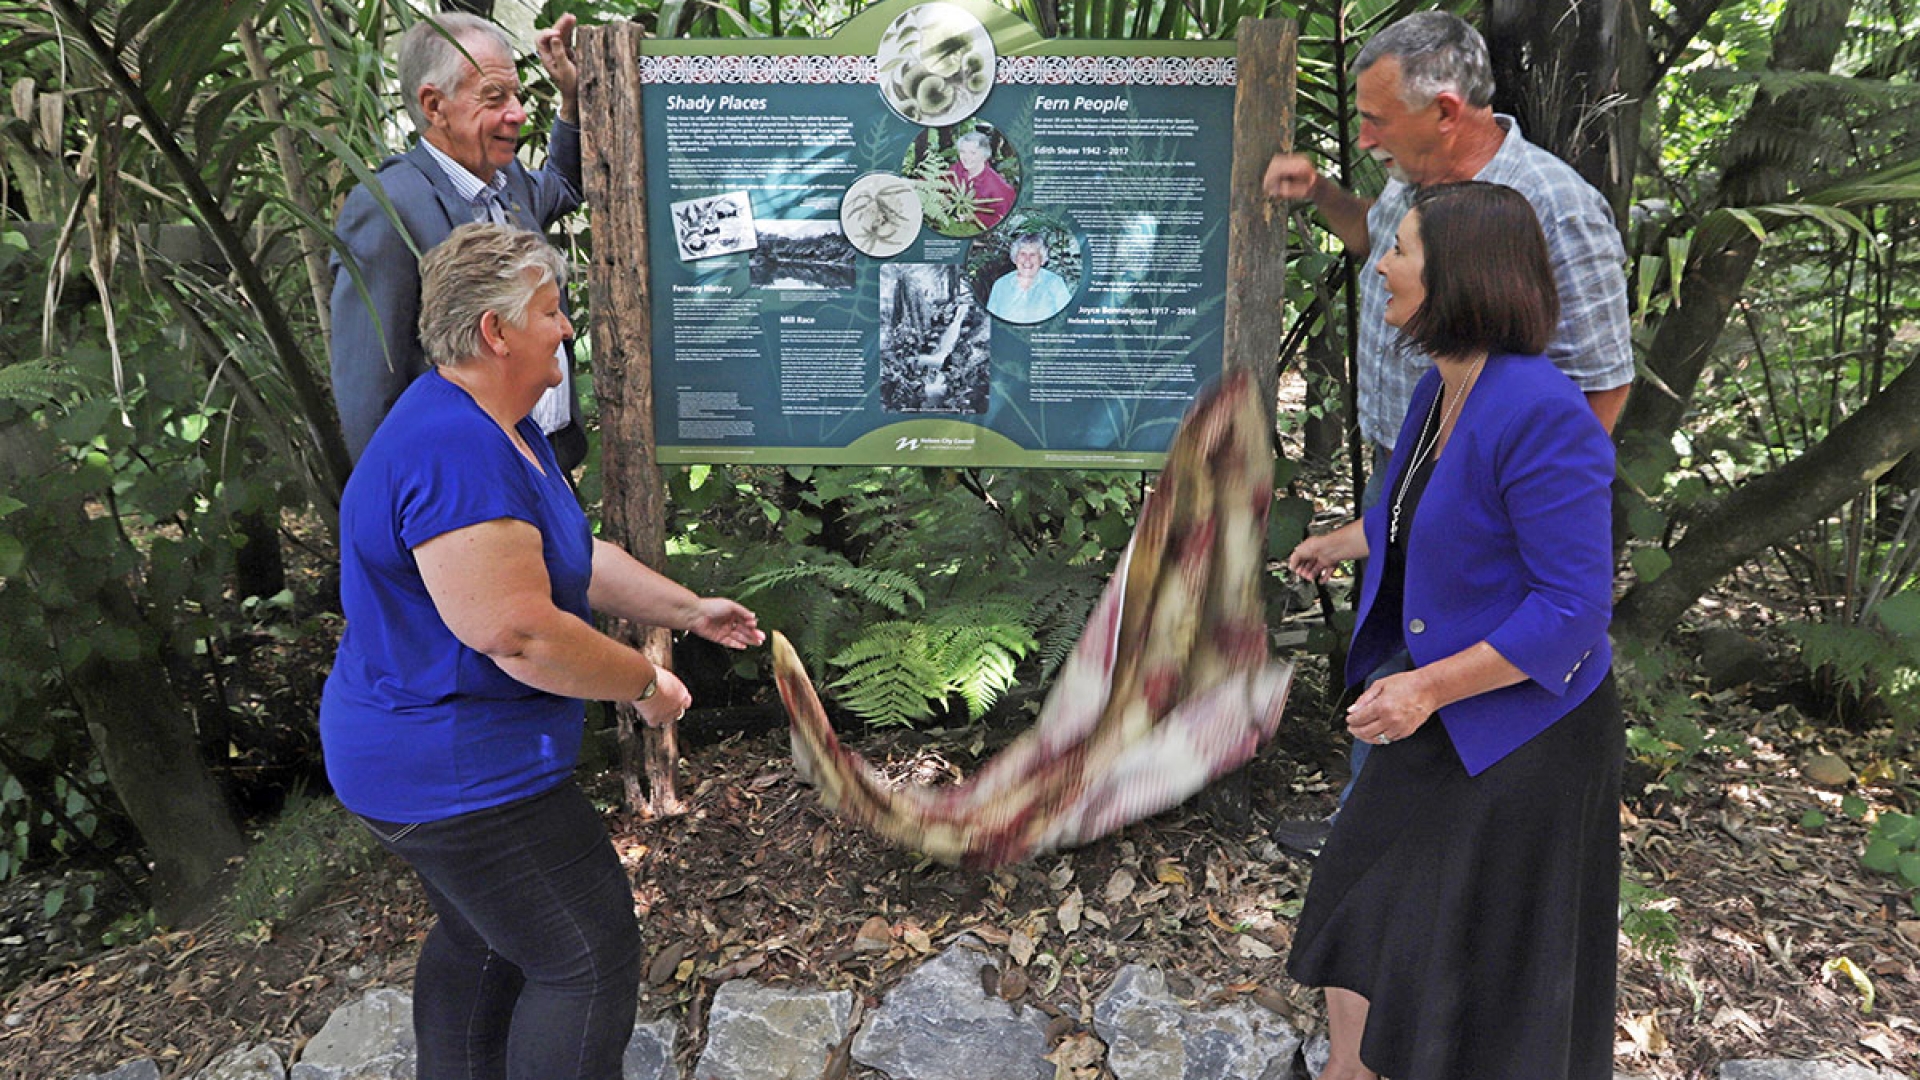 Mayor Rachel Reese unveils an information panel in honour of Joy Bonnington and Edith Shaw<br />
in the Fern Garden of Queen's Gardens, with Councillor Mel Courtney and Adrienne, daughter<br />
of Edith, left, and Derek, son of Joy, right.